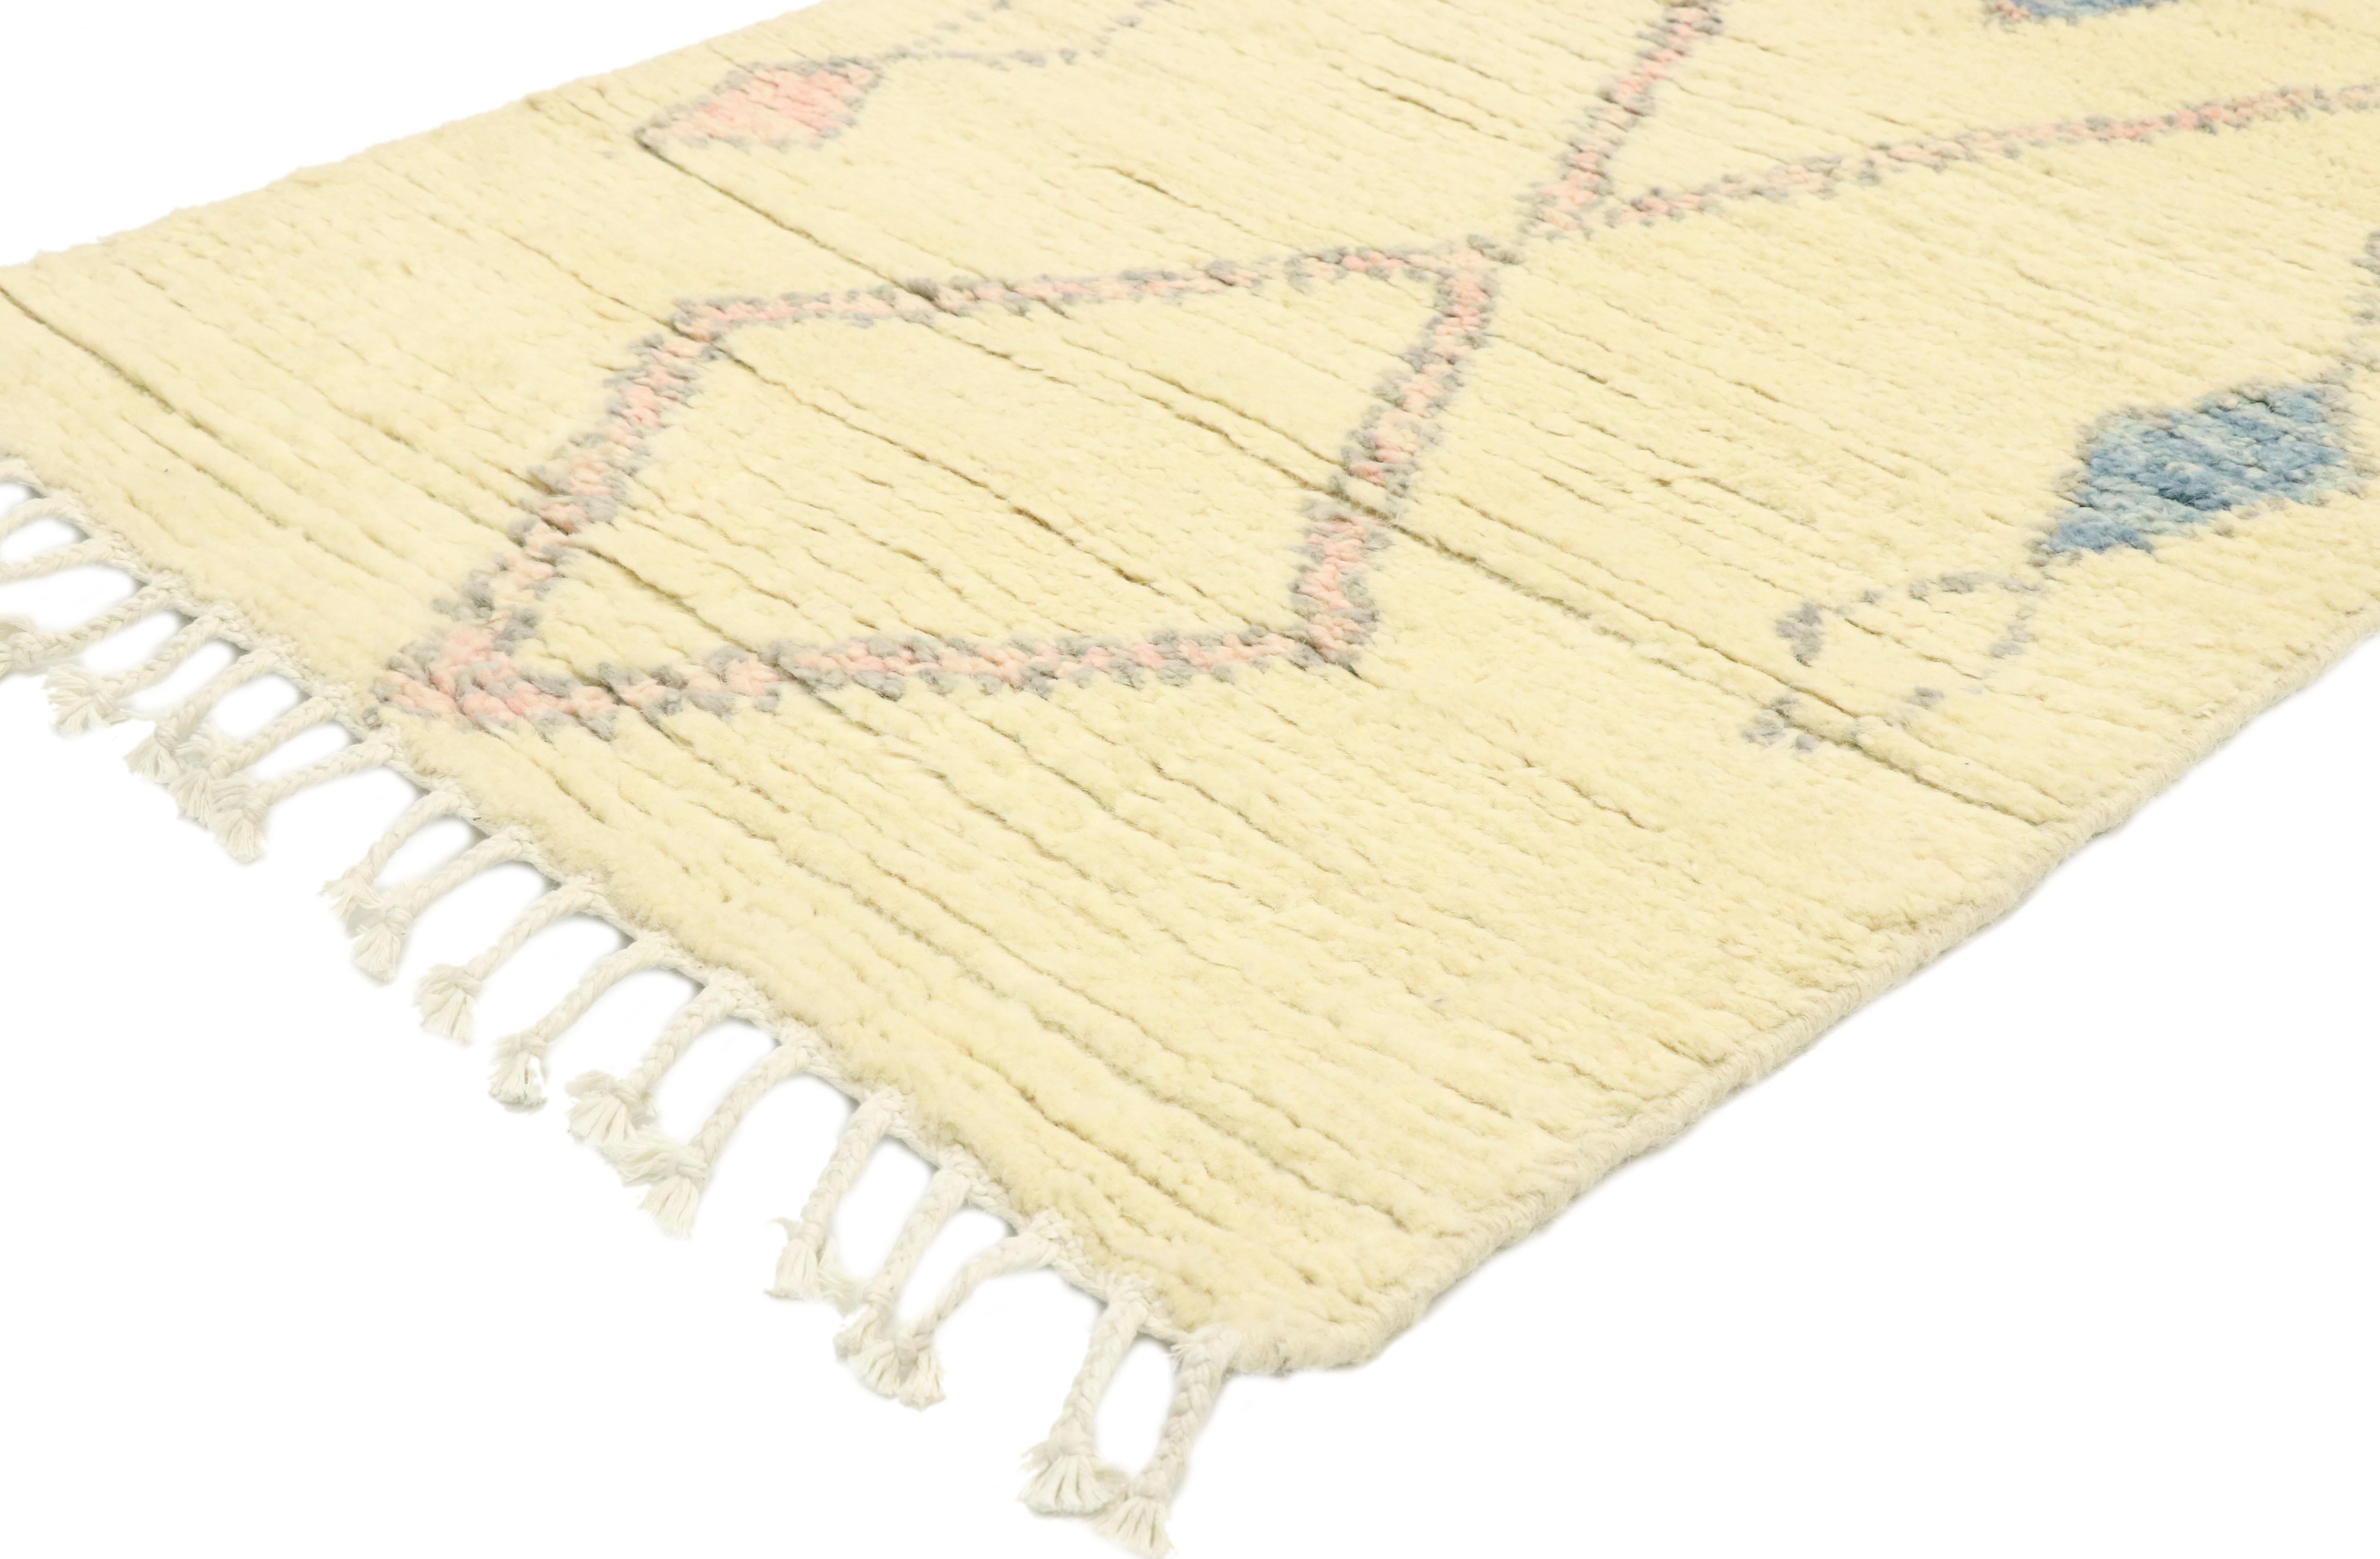 80608, new contemporary Moroccan Shag Hallway runner with Bohemian Tribal style. Softer yet no less striking, this hand knotted wool contemporary Moroccan runner embodies cozy boho chic tribal style with hygge vibes. The abrashed beige field